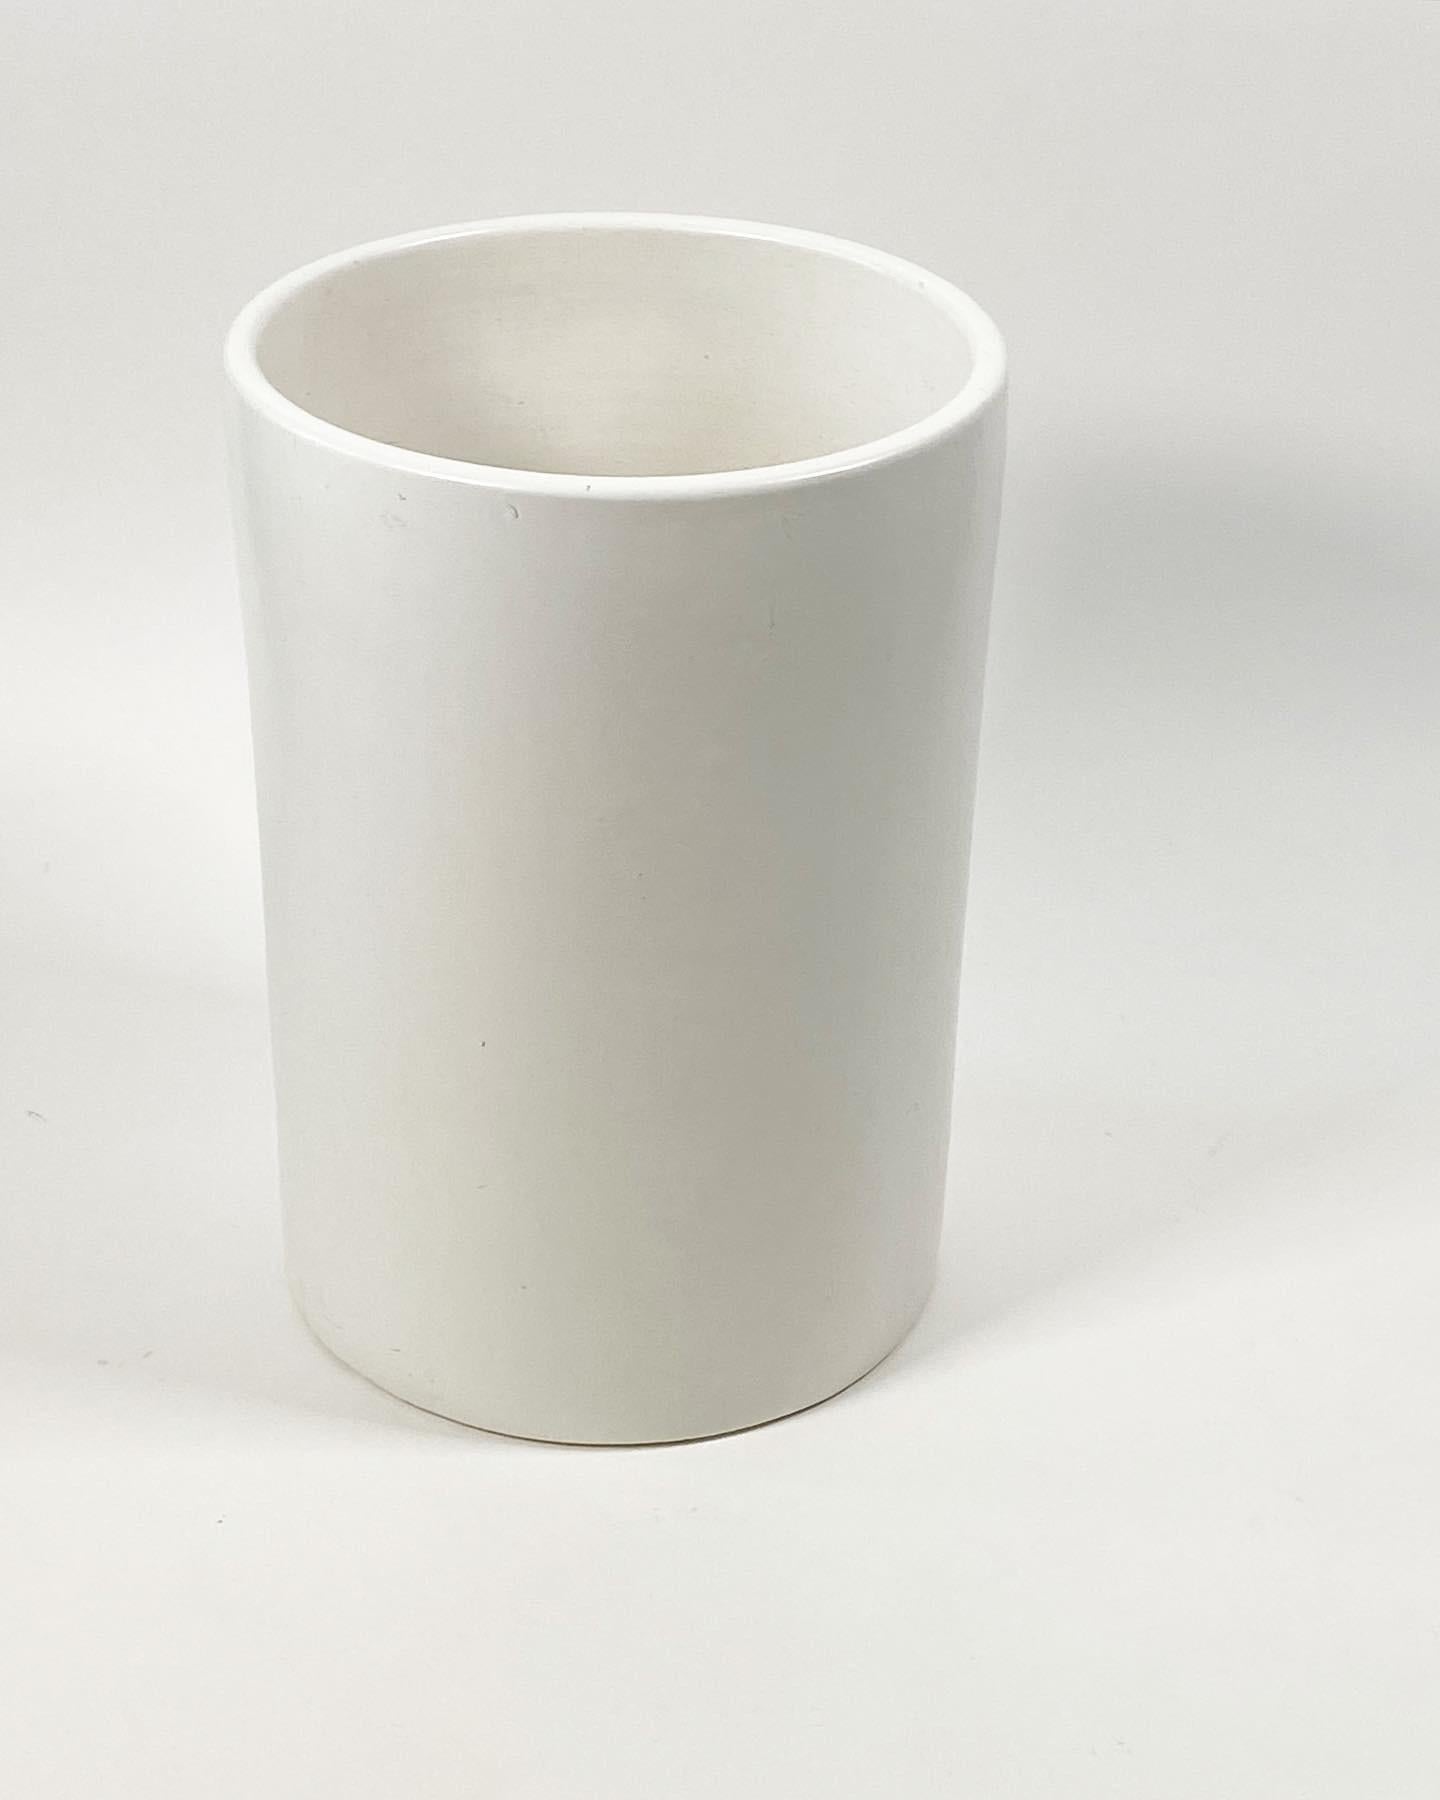 White ceramic cylinder planter designed by La Gardo Tackett for Architectural Pottery of Southern California circa 1950s and 60s, this model is called the C-12. With simple clean lines that work with many interiors and exteriors of the home for